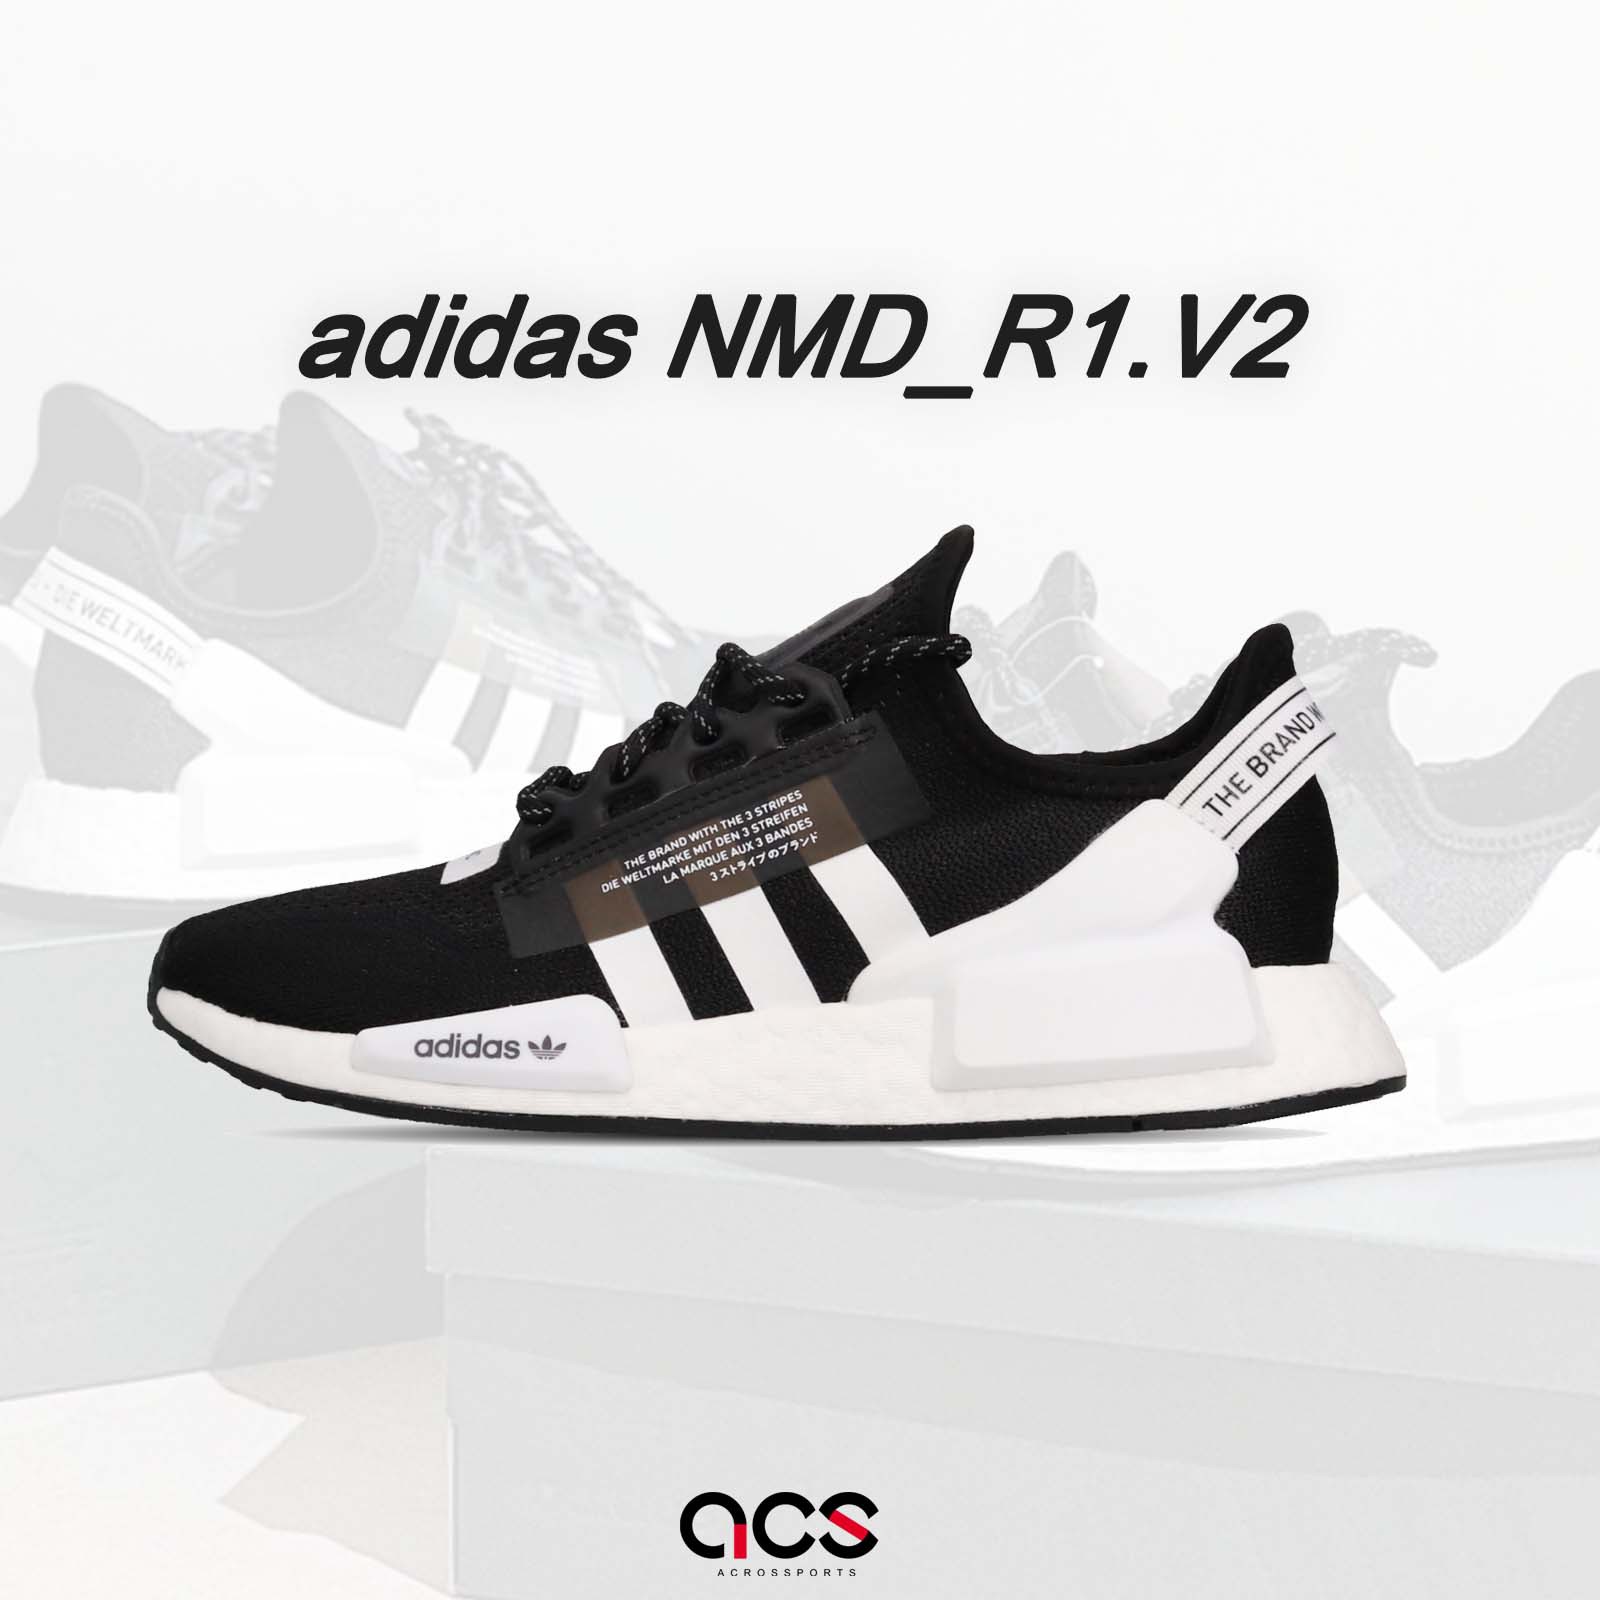 adidas shoes men black and white